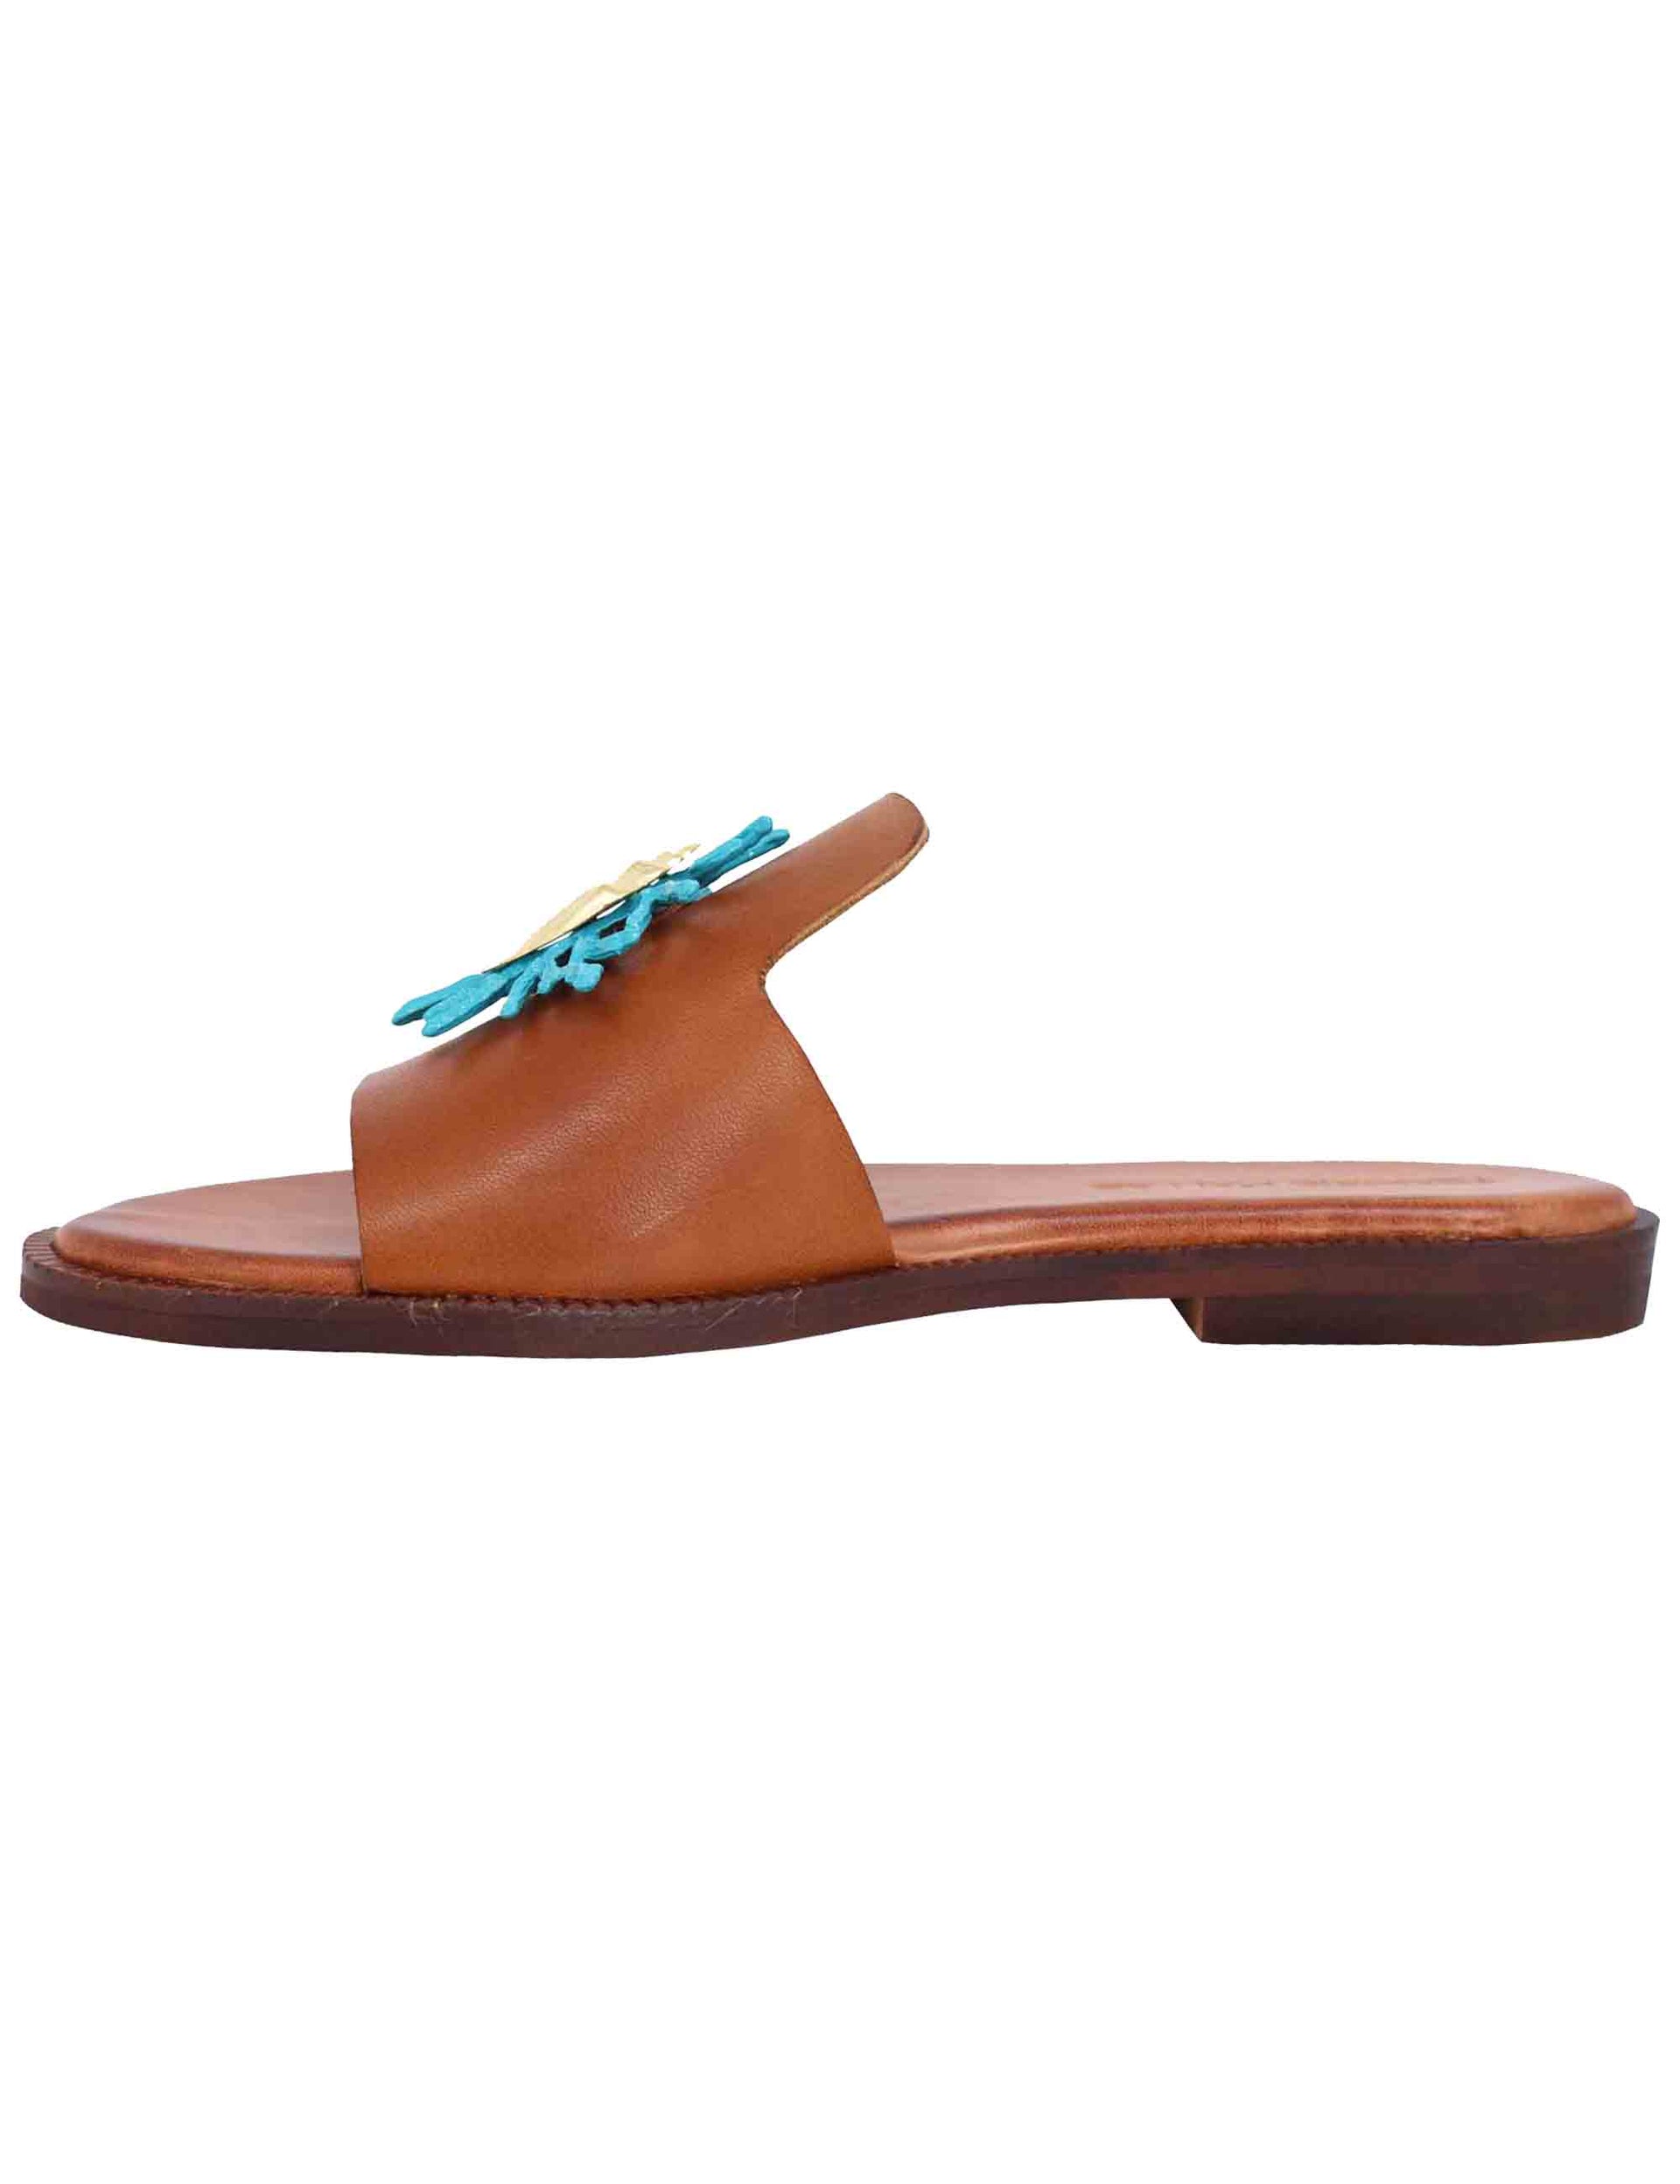 Women's flat sandals in tan leather with turquoise accessory